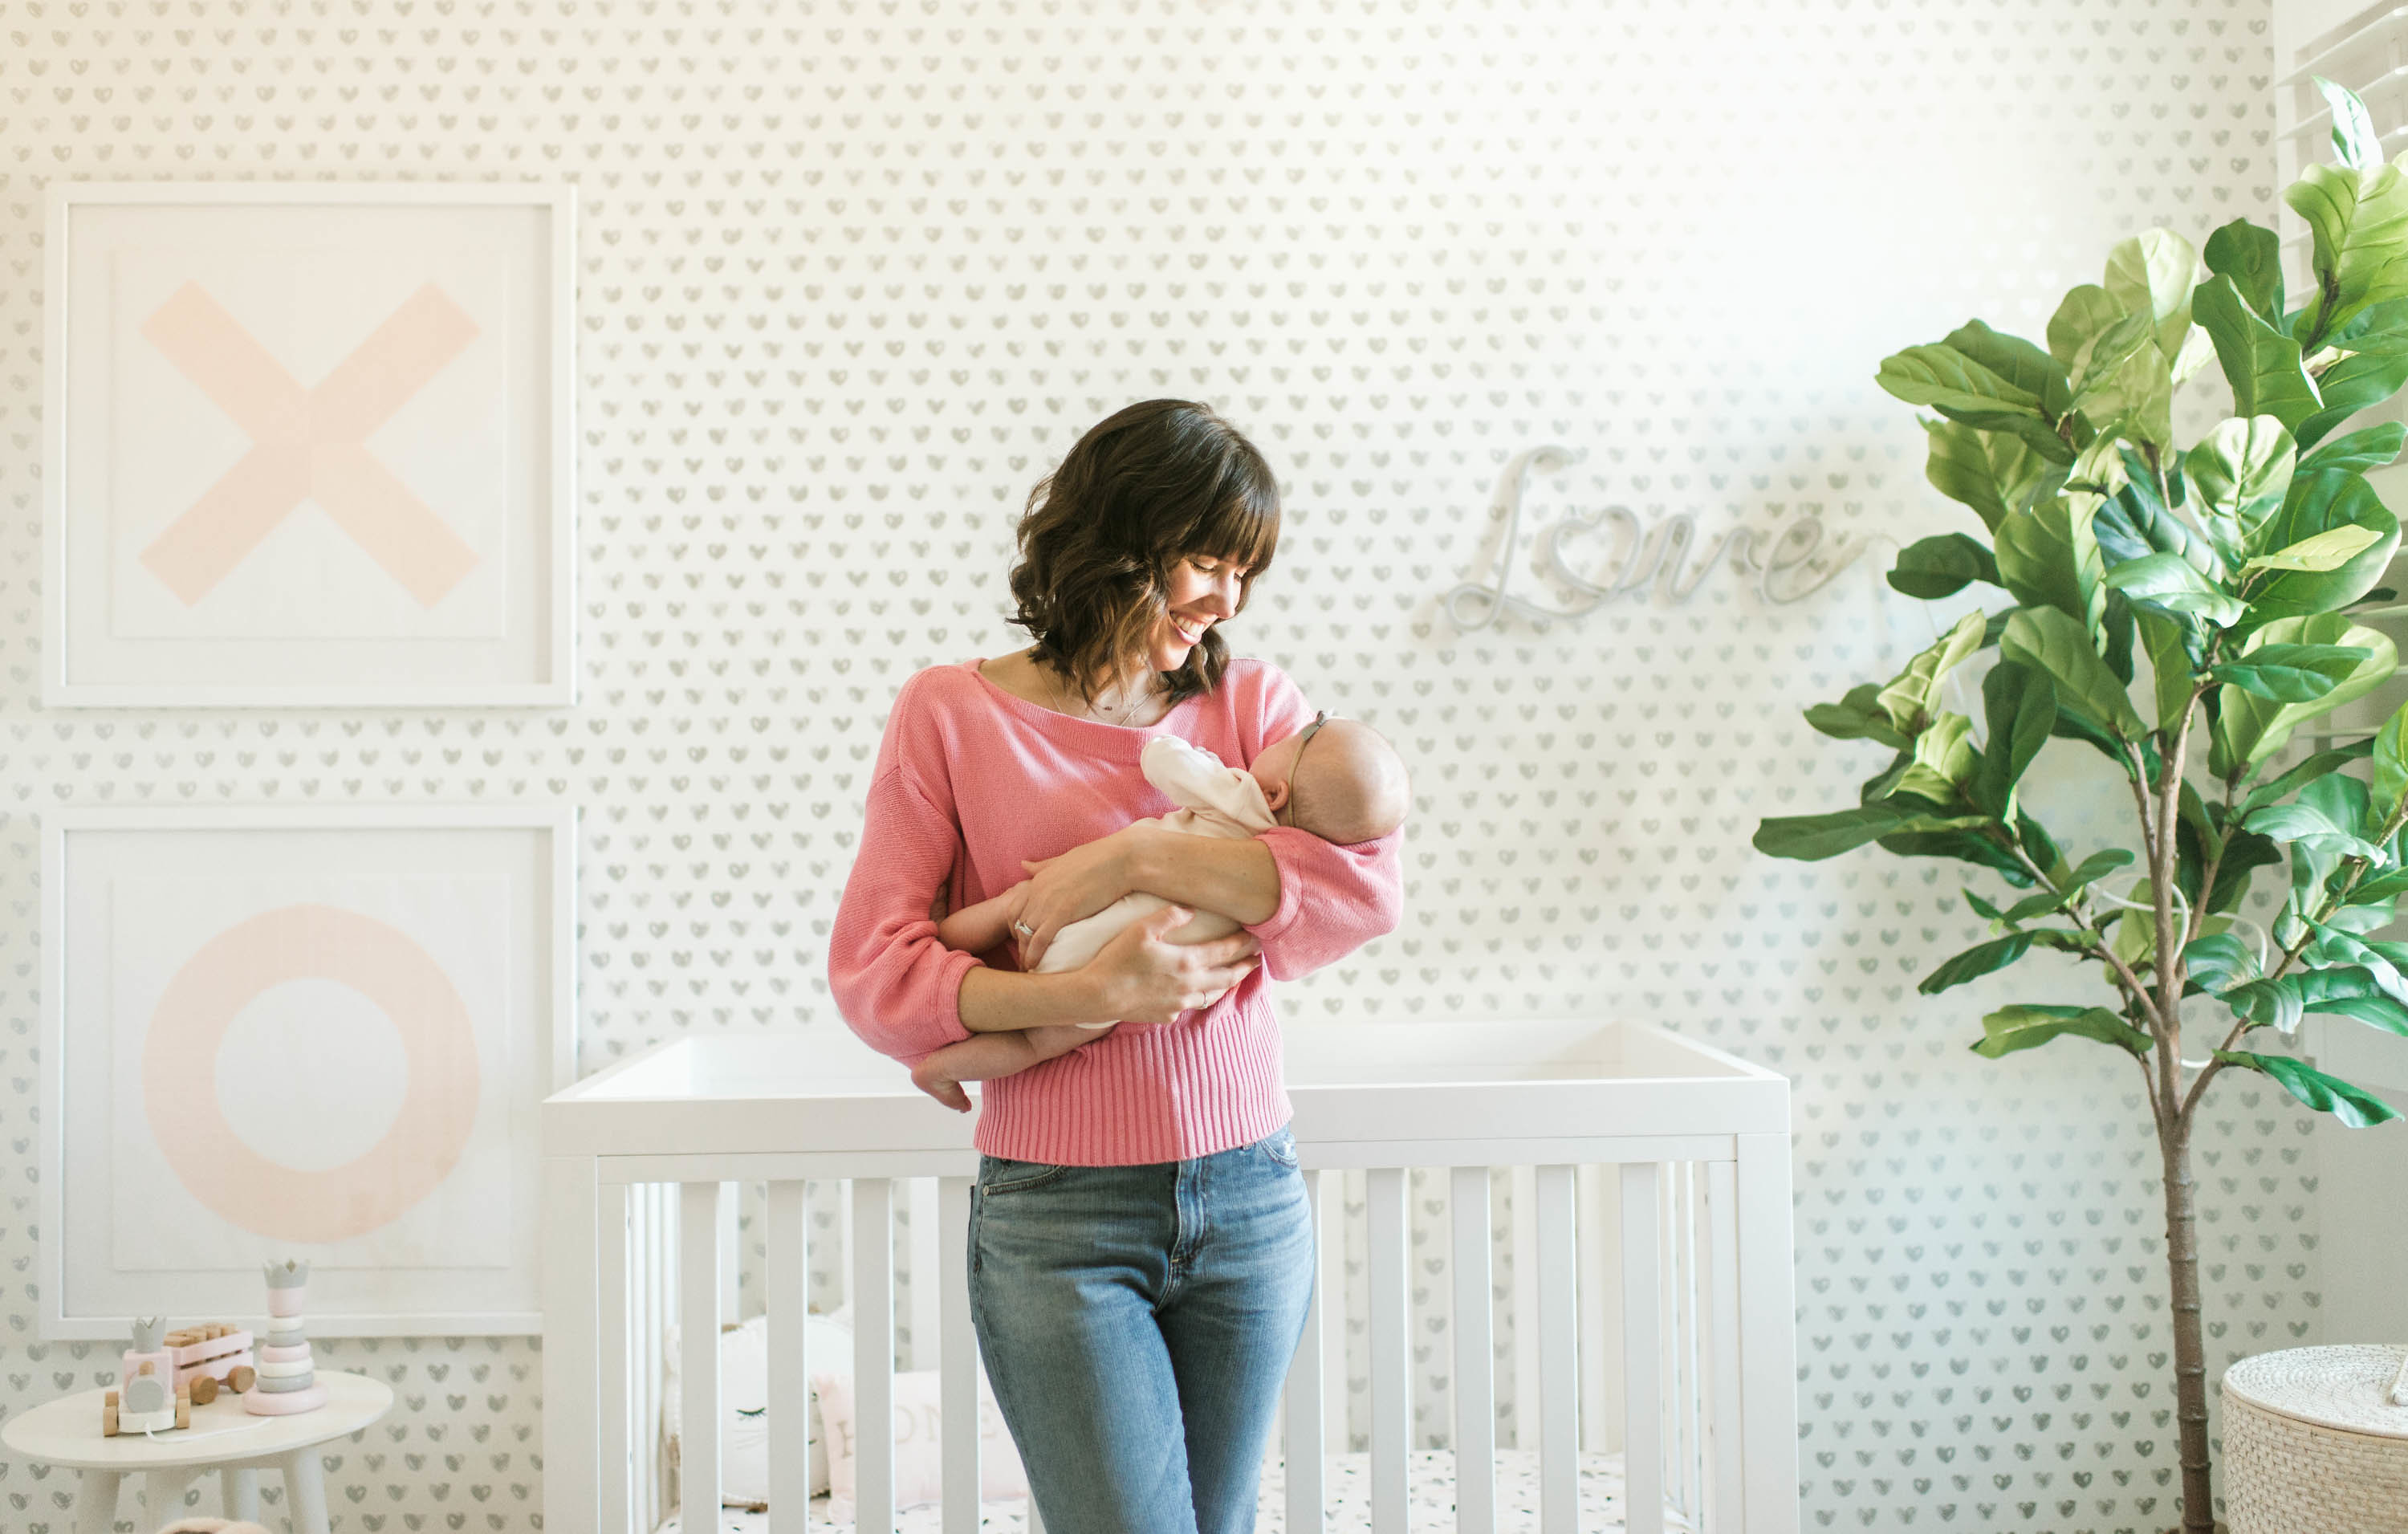 XO Nursery with Heart Wallpaper and Faux Fiddle Leaf Fig